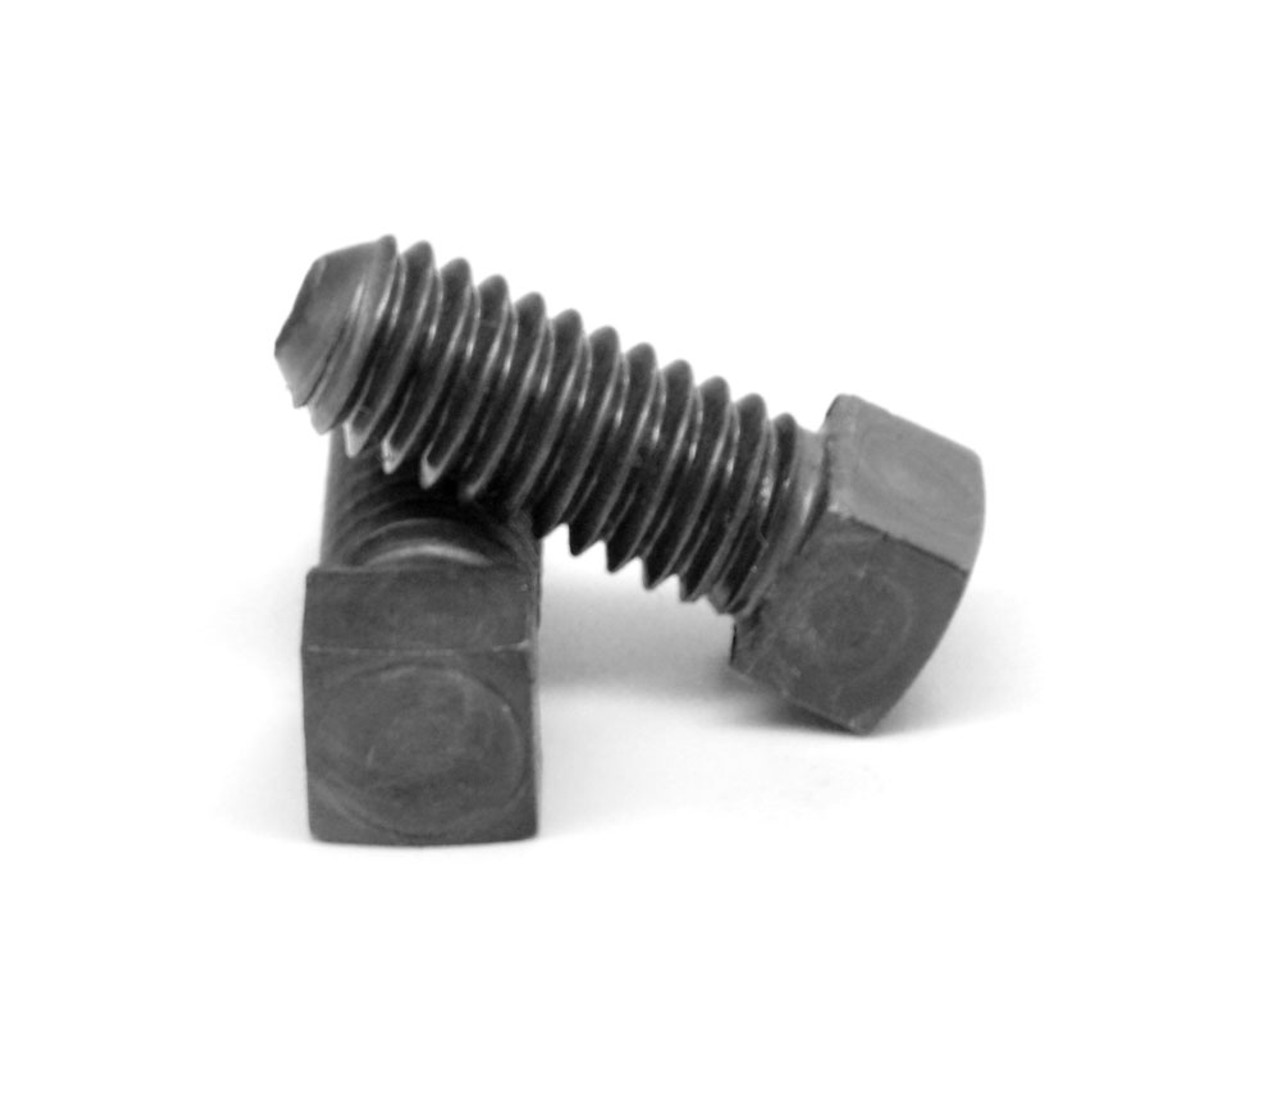 3/8"-16 x 1 1/4" (FT) Coarse Thread Square Head Set Screw Cone Point Low Carbon Steel Case Hardened Plain Finish